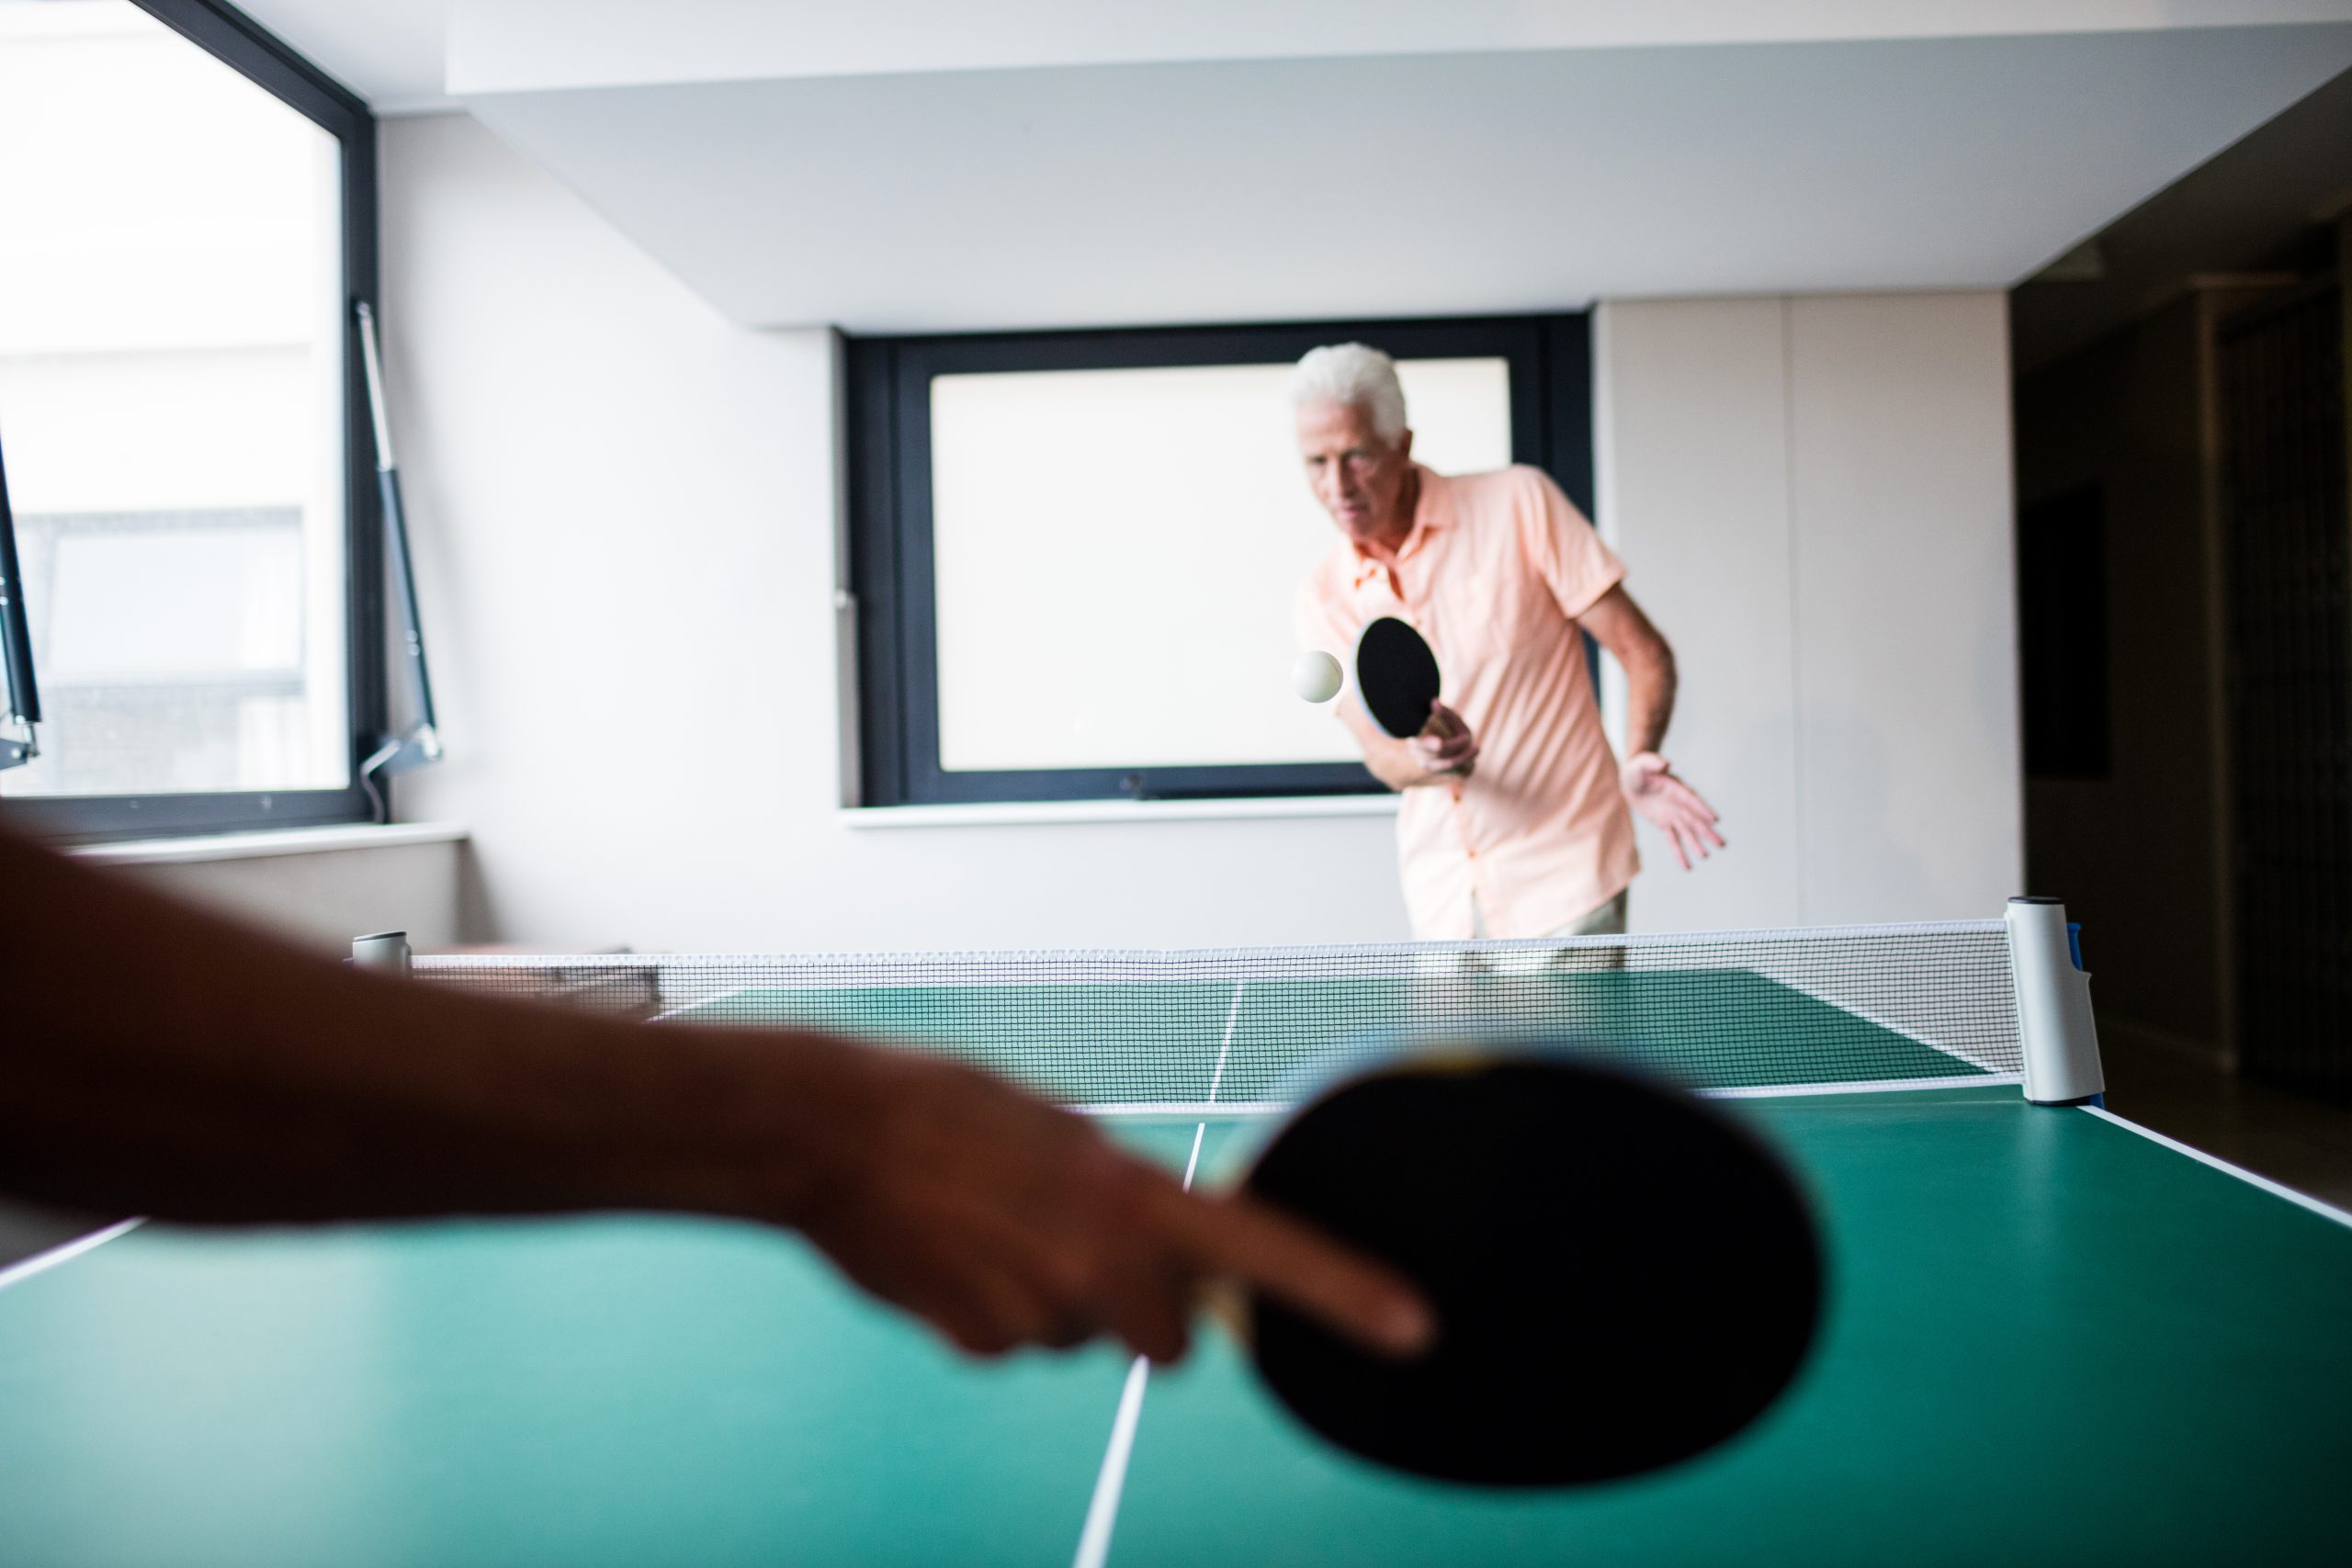 10 Tips for Teaching Ping Pong to Older Populations and Helping Them Manage Their Alzheimer's Disease